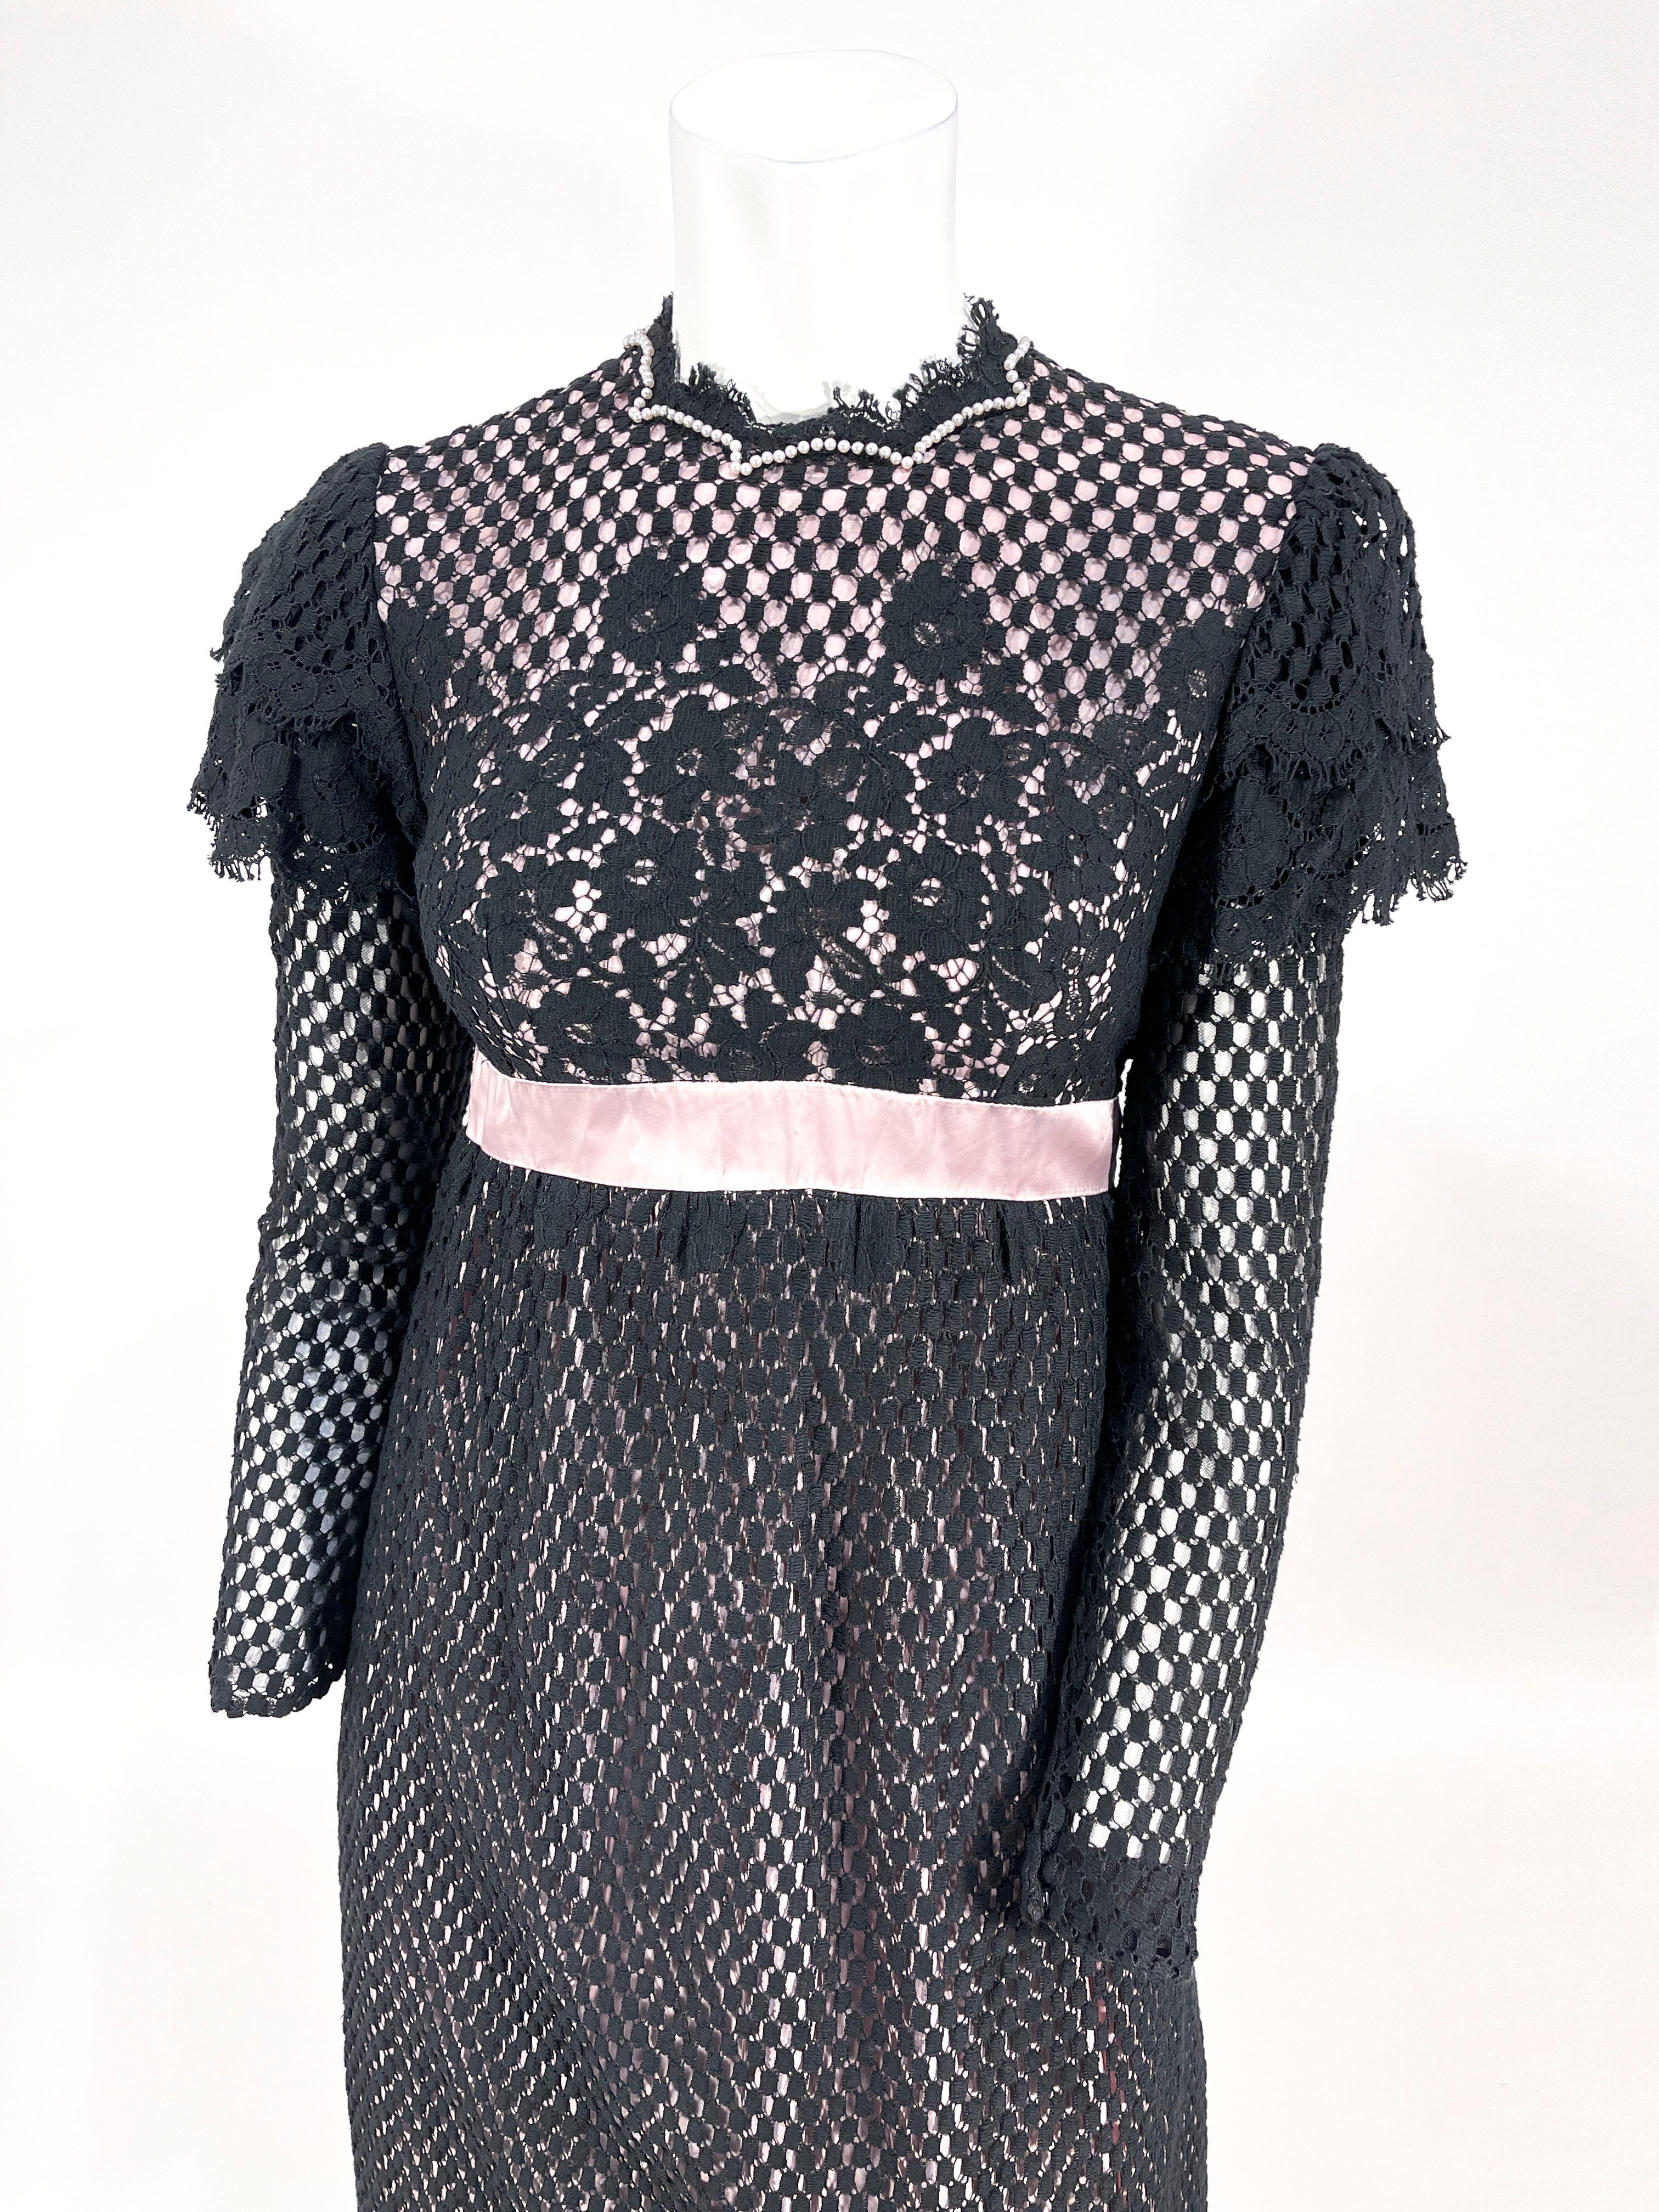 1960s Emma Domb Over dyed lace dress. The entire dress is featuring a black dyed lace. The full length sleeves are sheer lined with a sheer net and has a decorative lace cap sleeves on the top of the shoulder. The bodice and skirt of the dress are